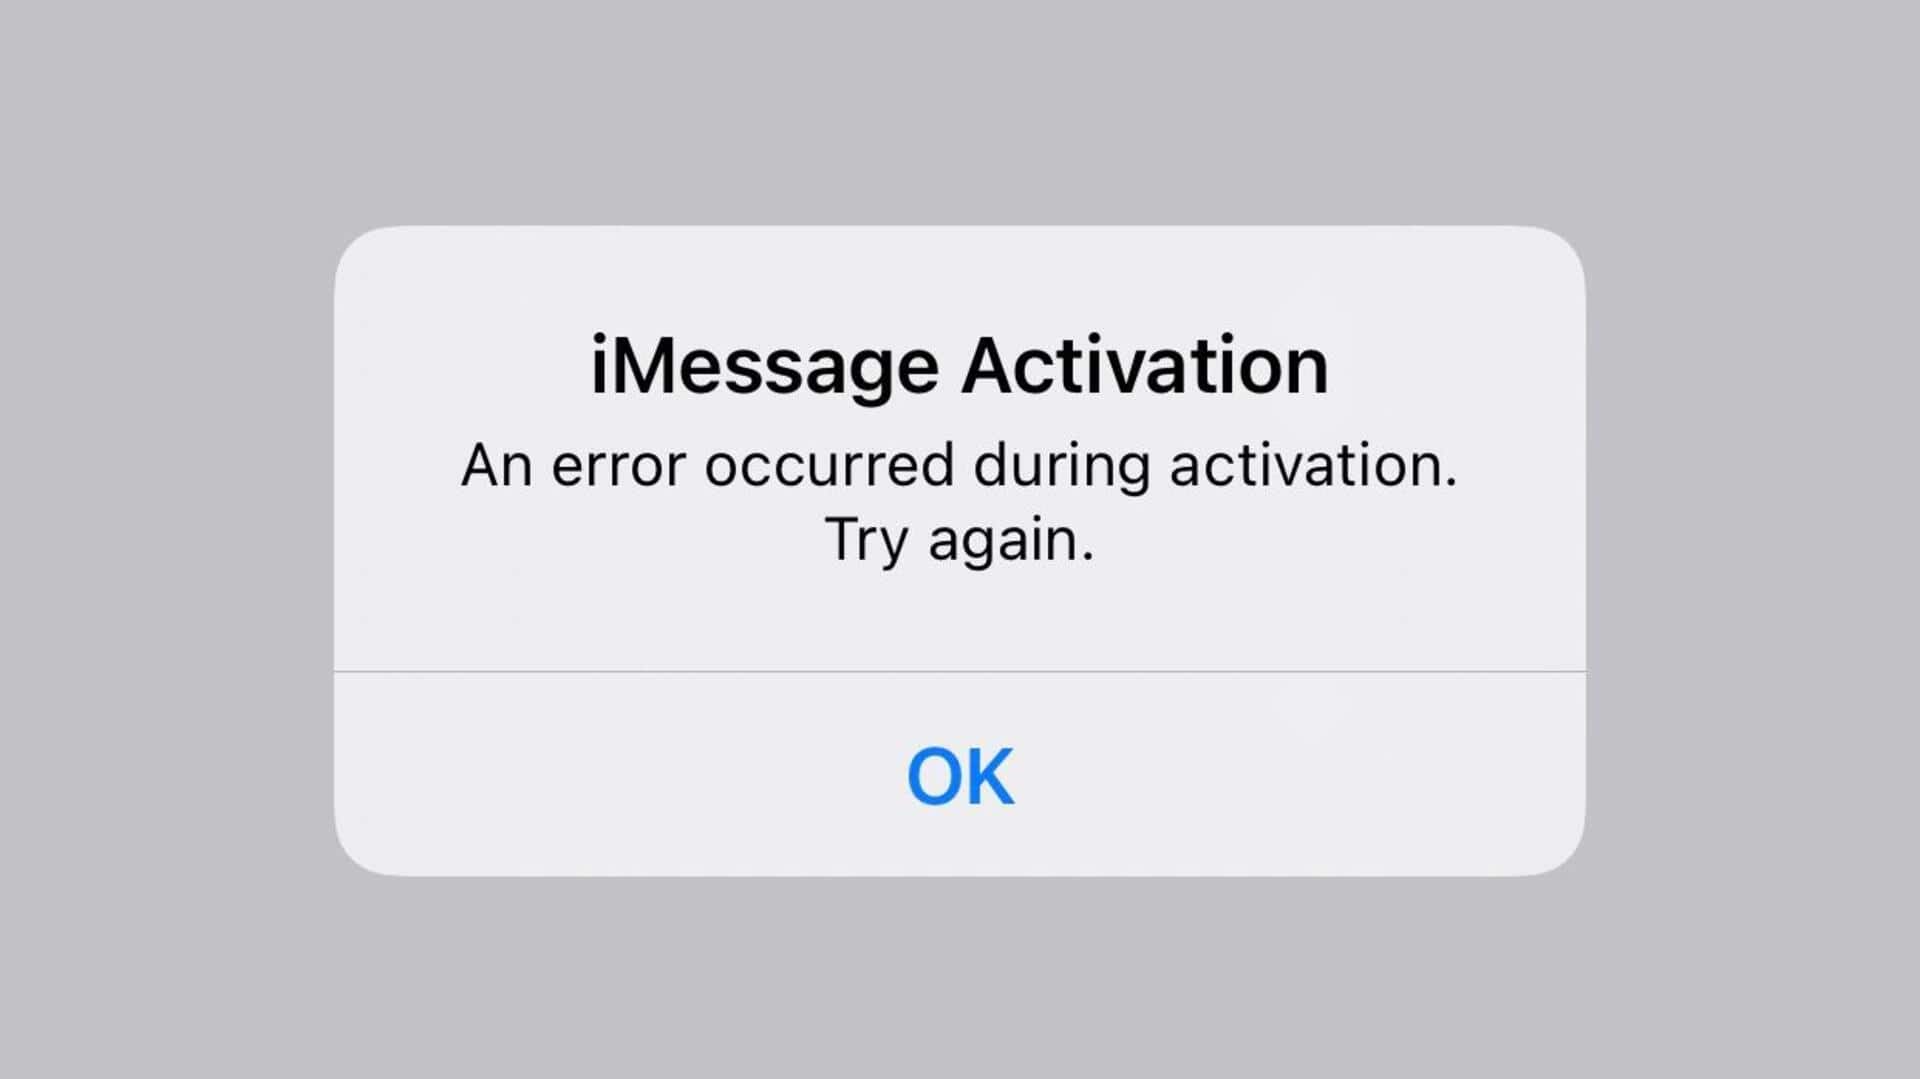 iMessage not working? Here's how to fix activation errors